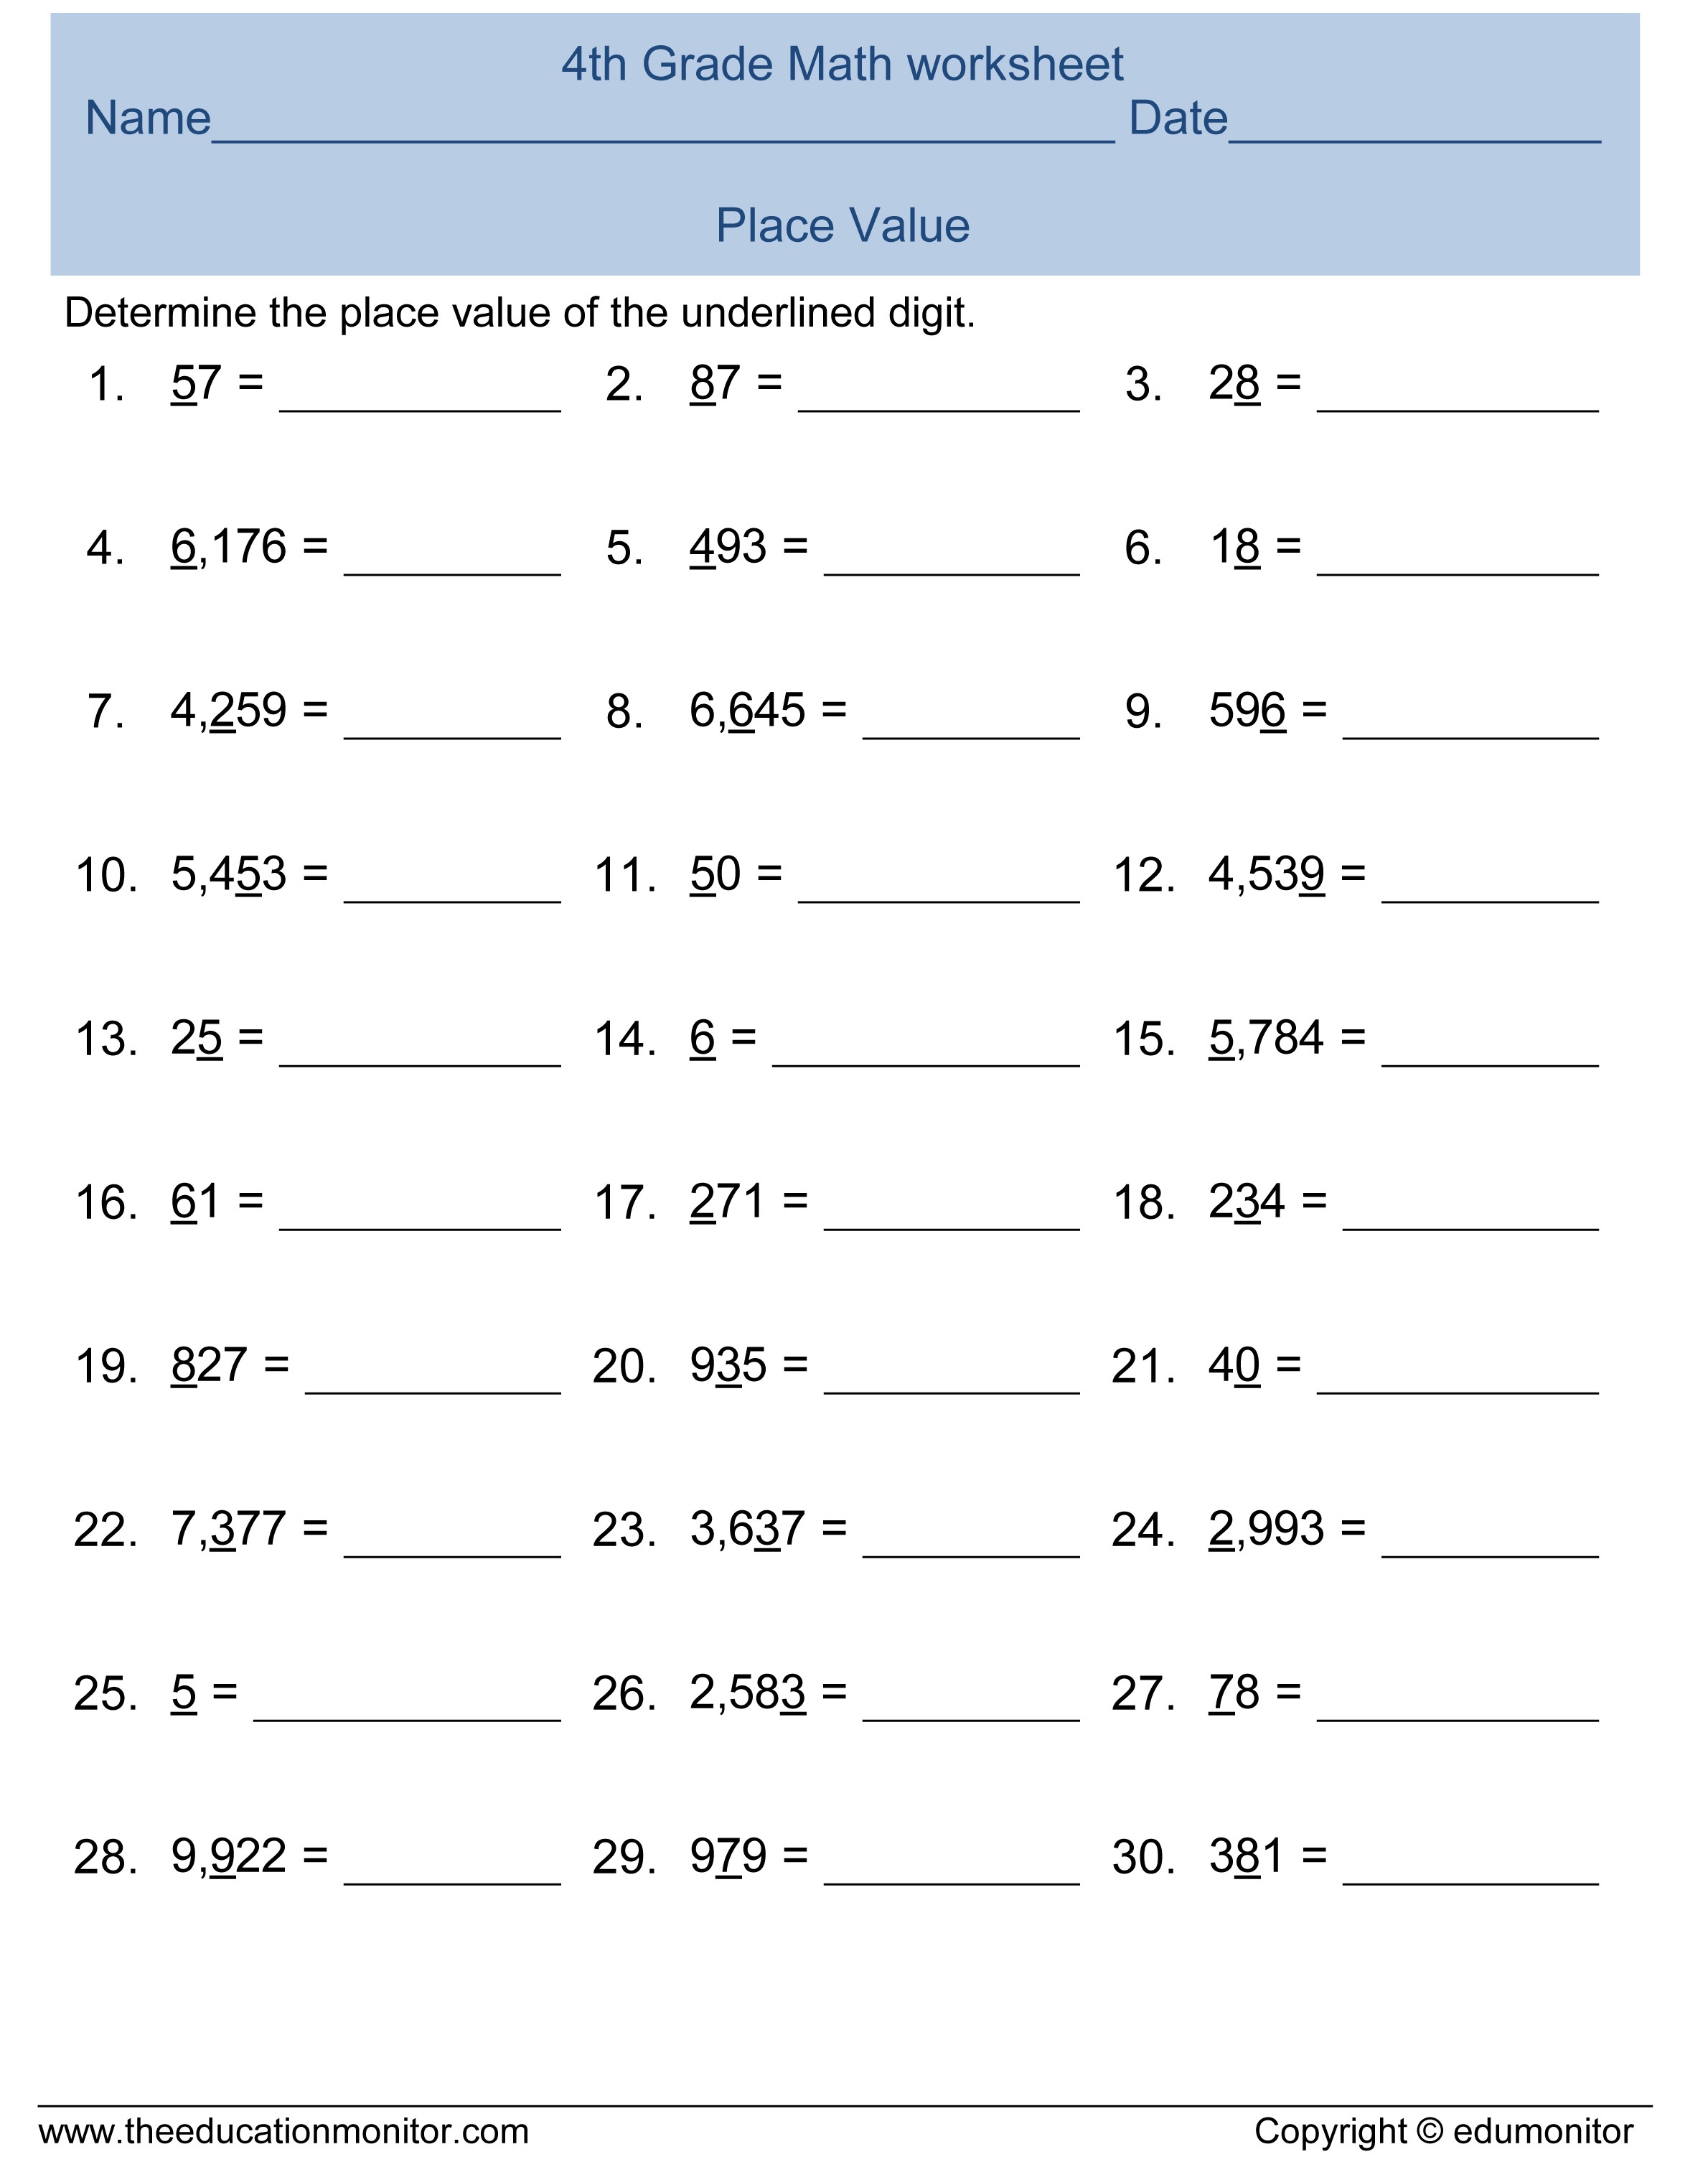 Place Value Worksheets And Printables | Free Place Value Printables - Free Printable Place Value Worksheets